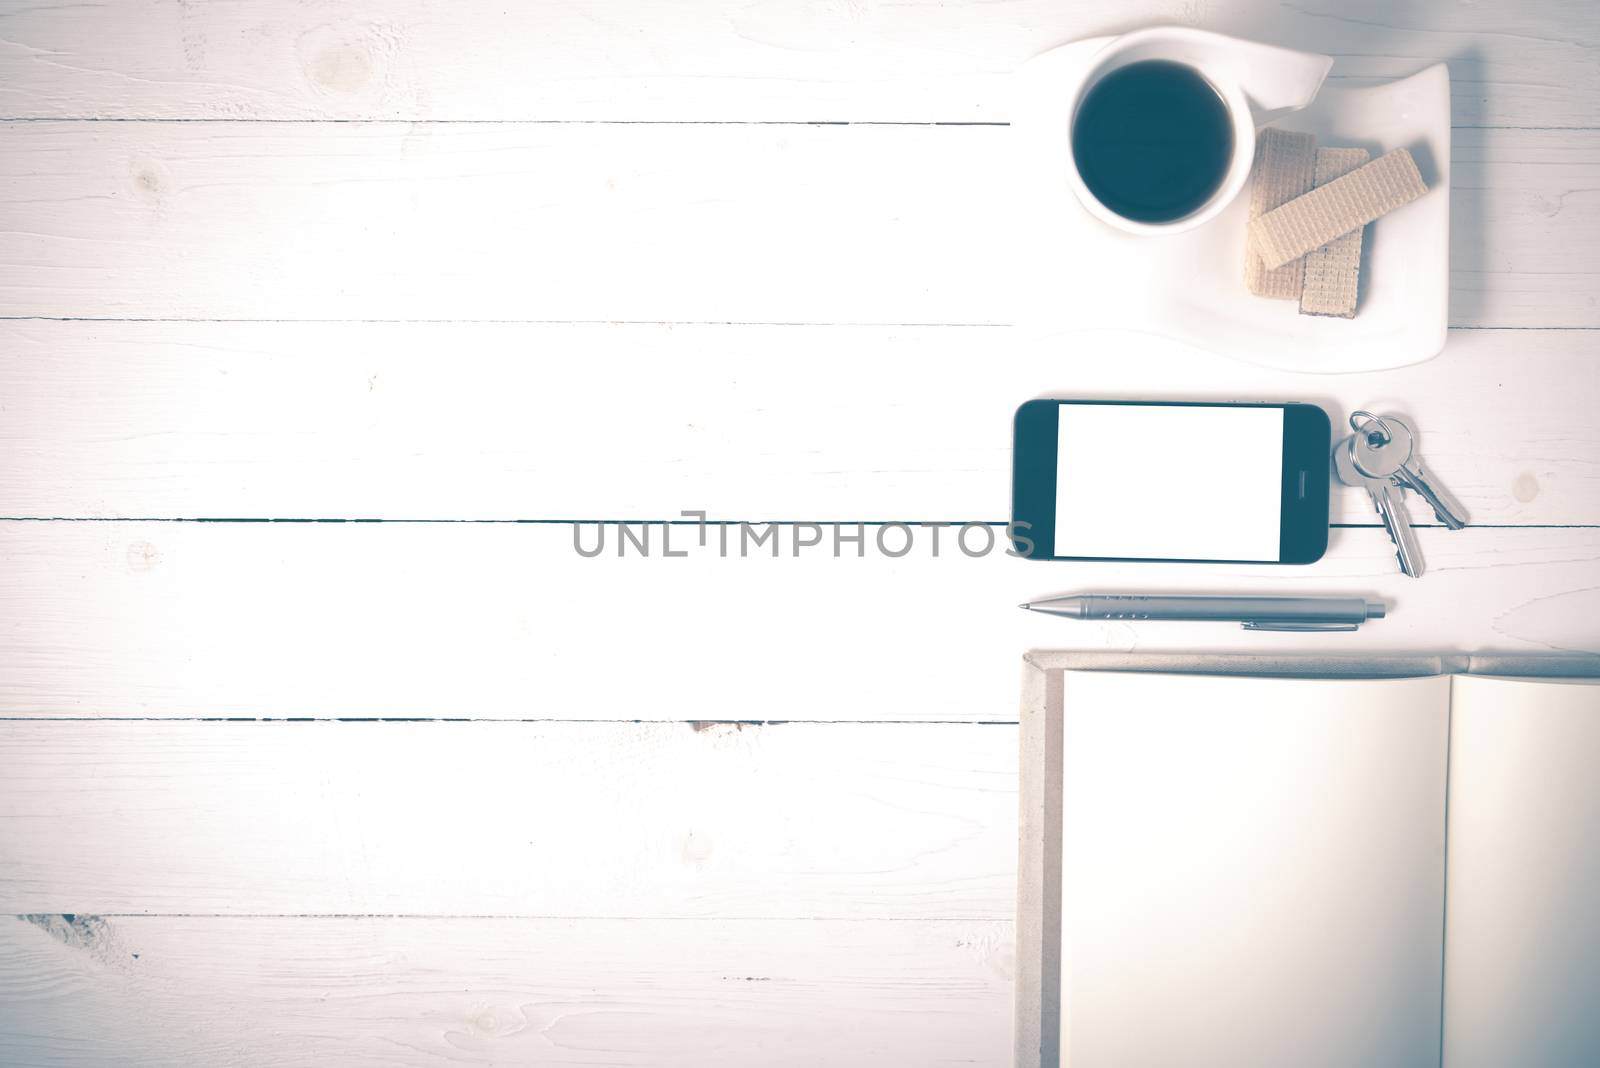 coffee cup with wafer,phone,key,notebook on white wood background vintage style